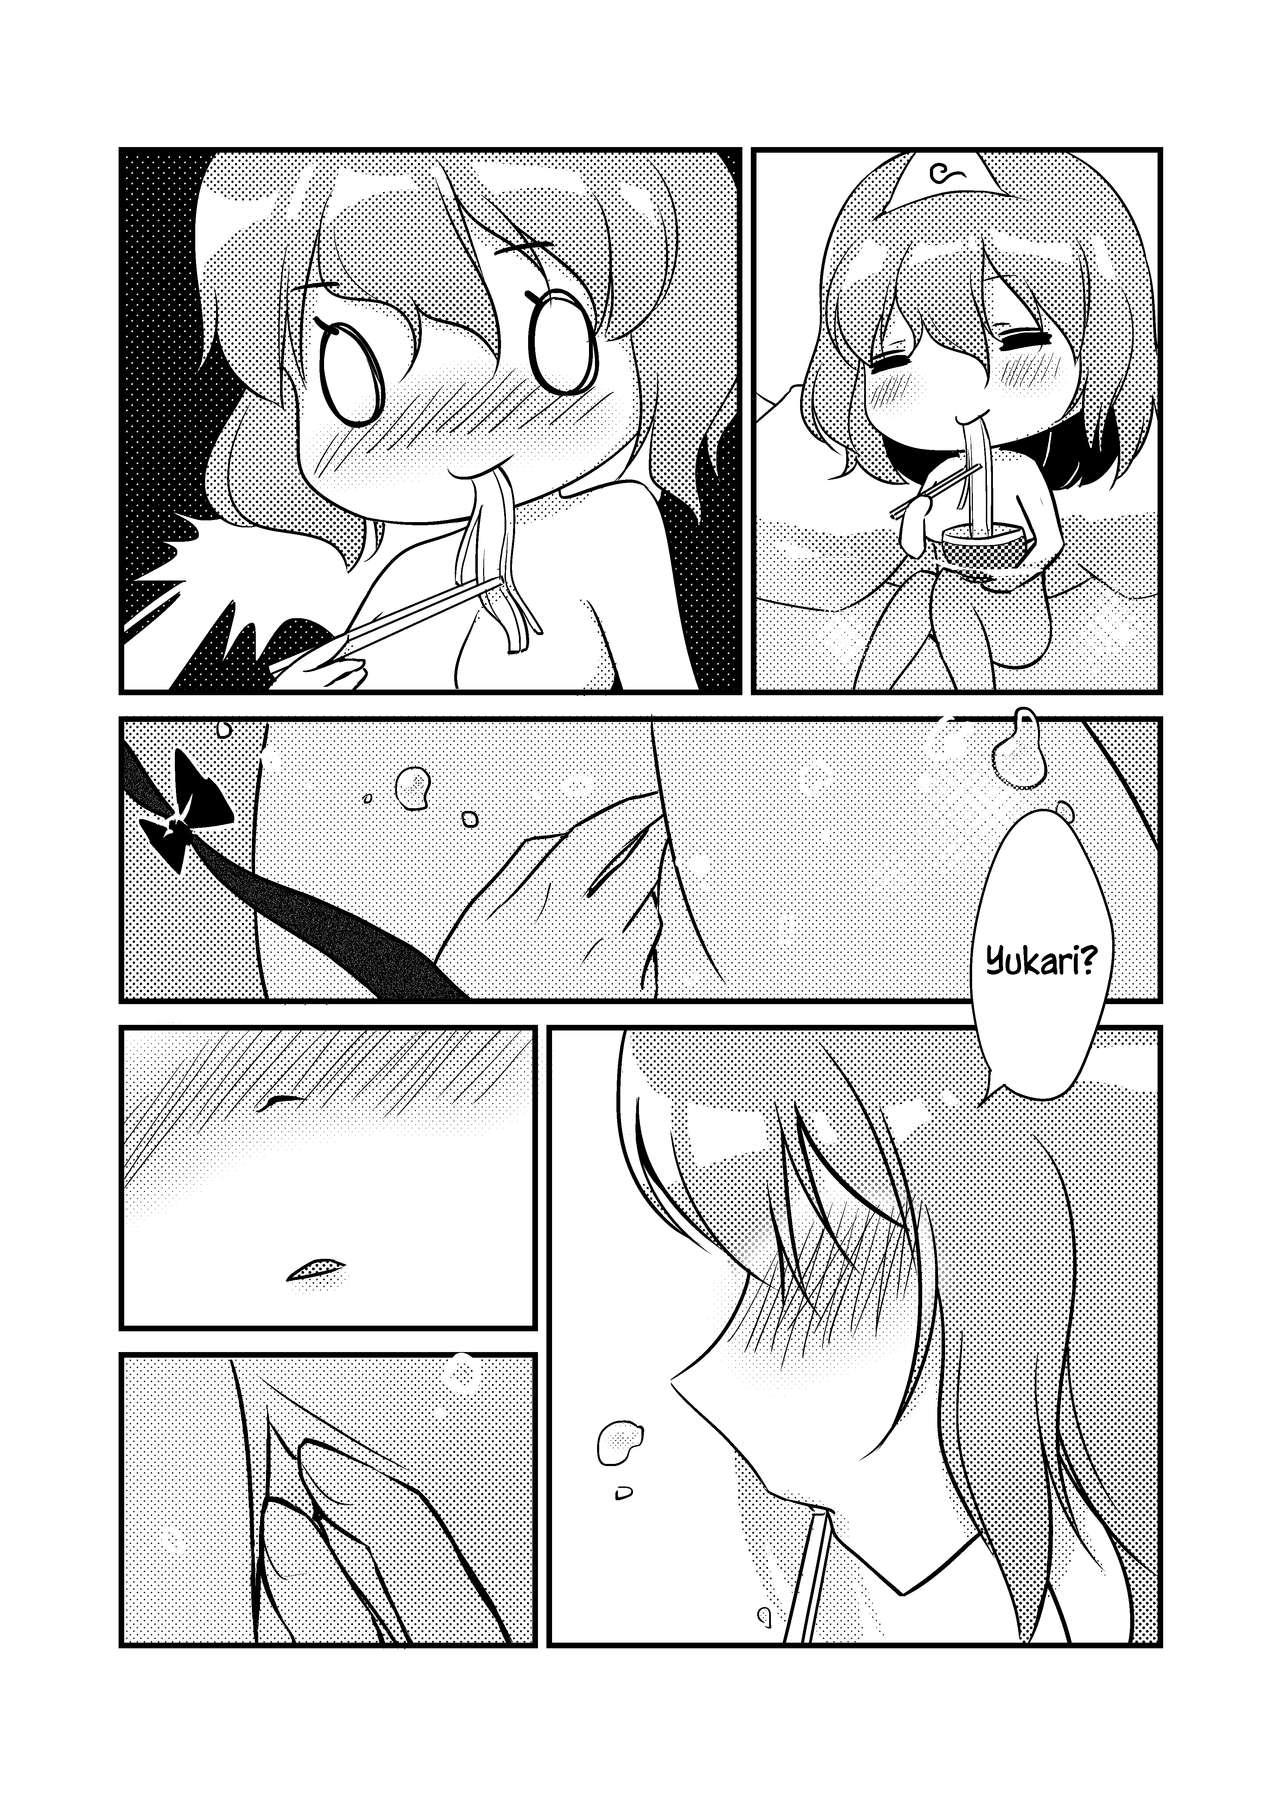 Mistress ????一起泡温泉吧！ | ????Let's Soak in the Hot Spring! - Touhou project Best Blowjobs Ever - Page 5